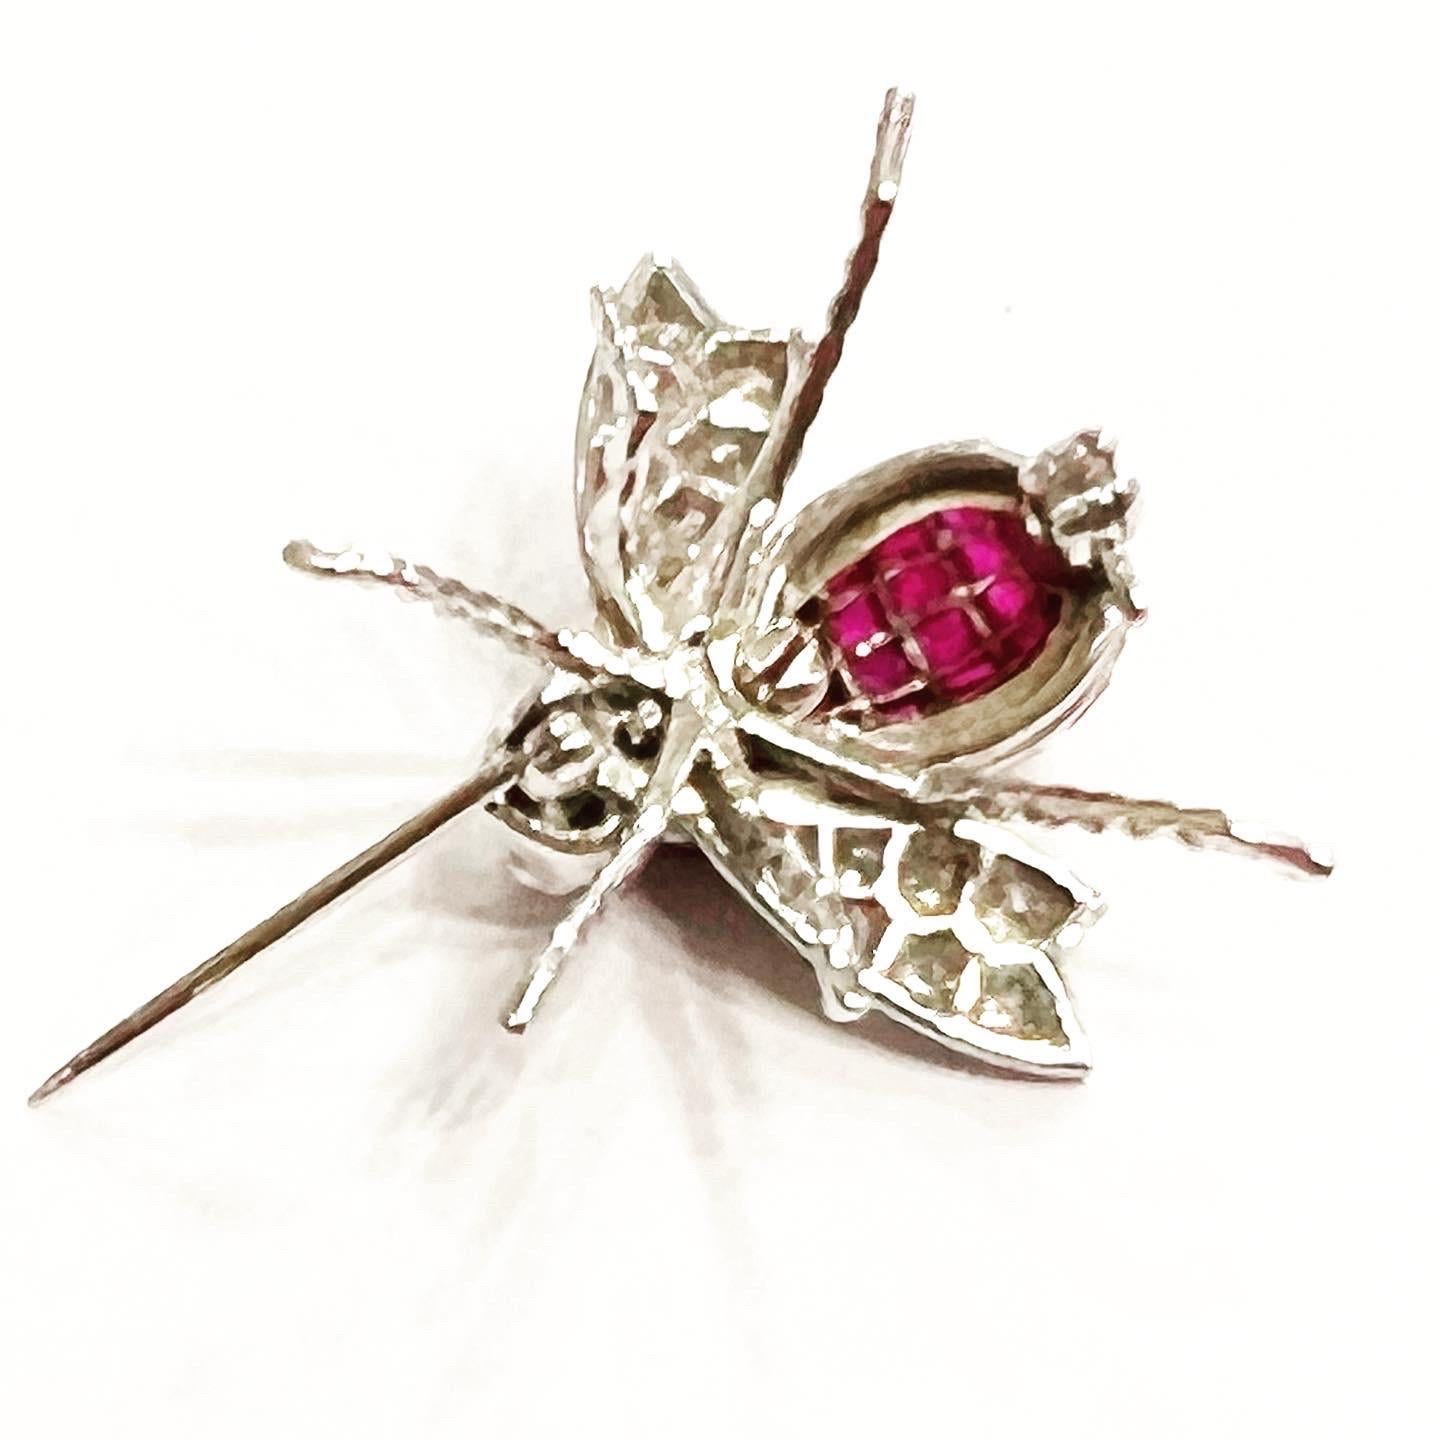  18k White Gold, Pavé Setting Ruby Diamond Fly Bee Brooch For Sale 1